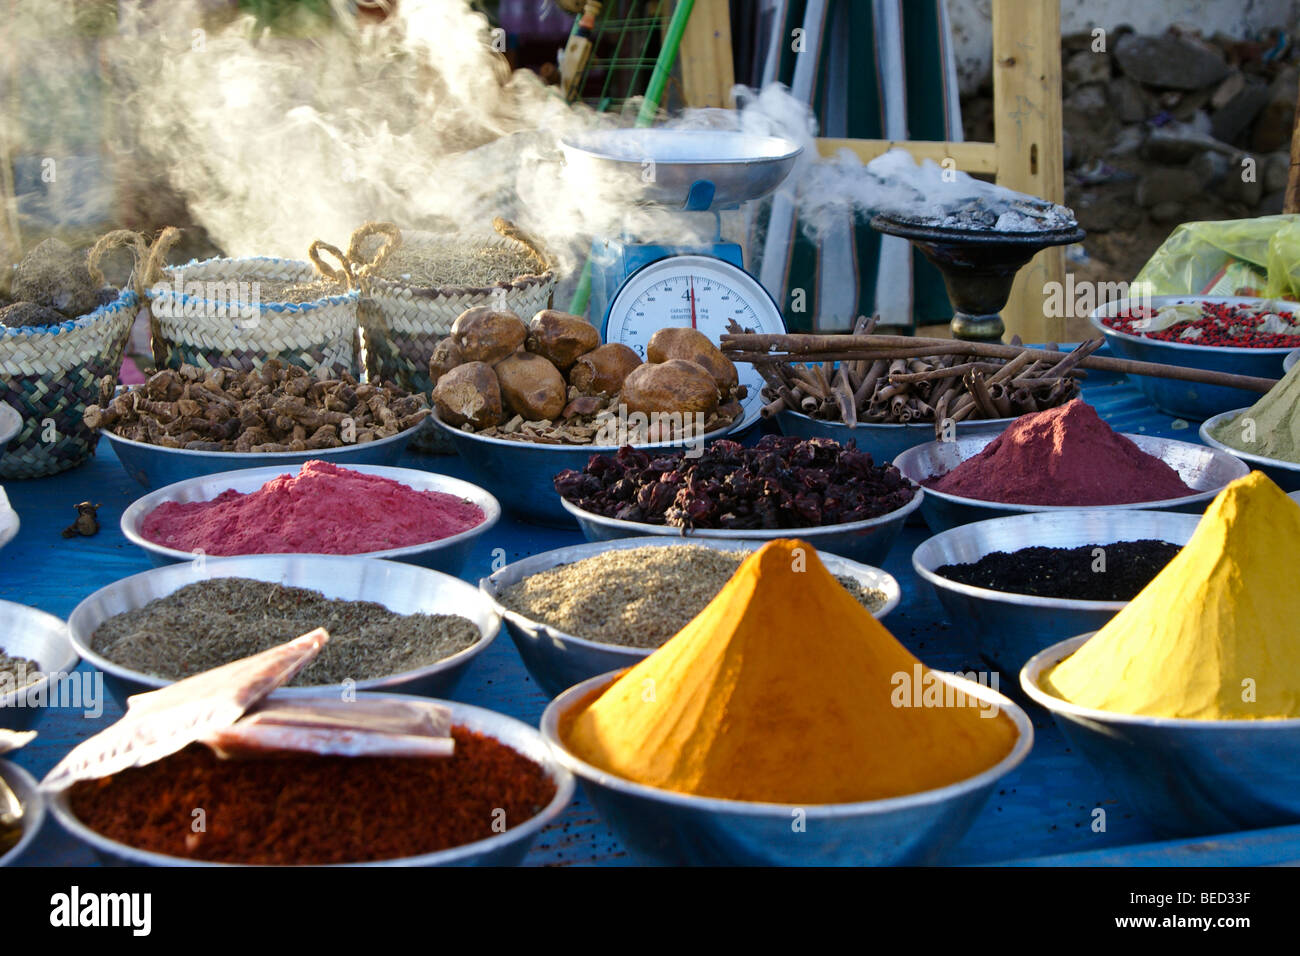 Spices for sale, Aswan, Egypt Stock Photo